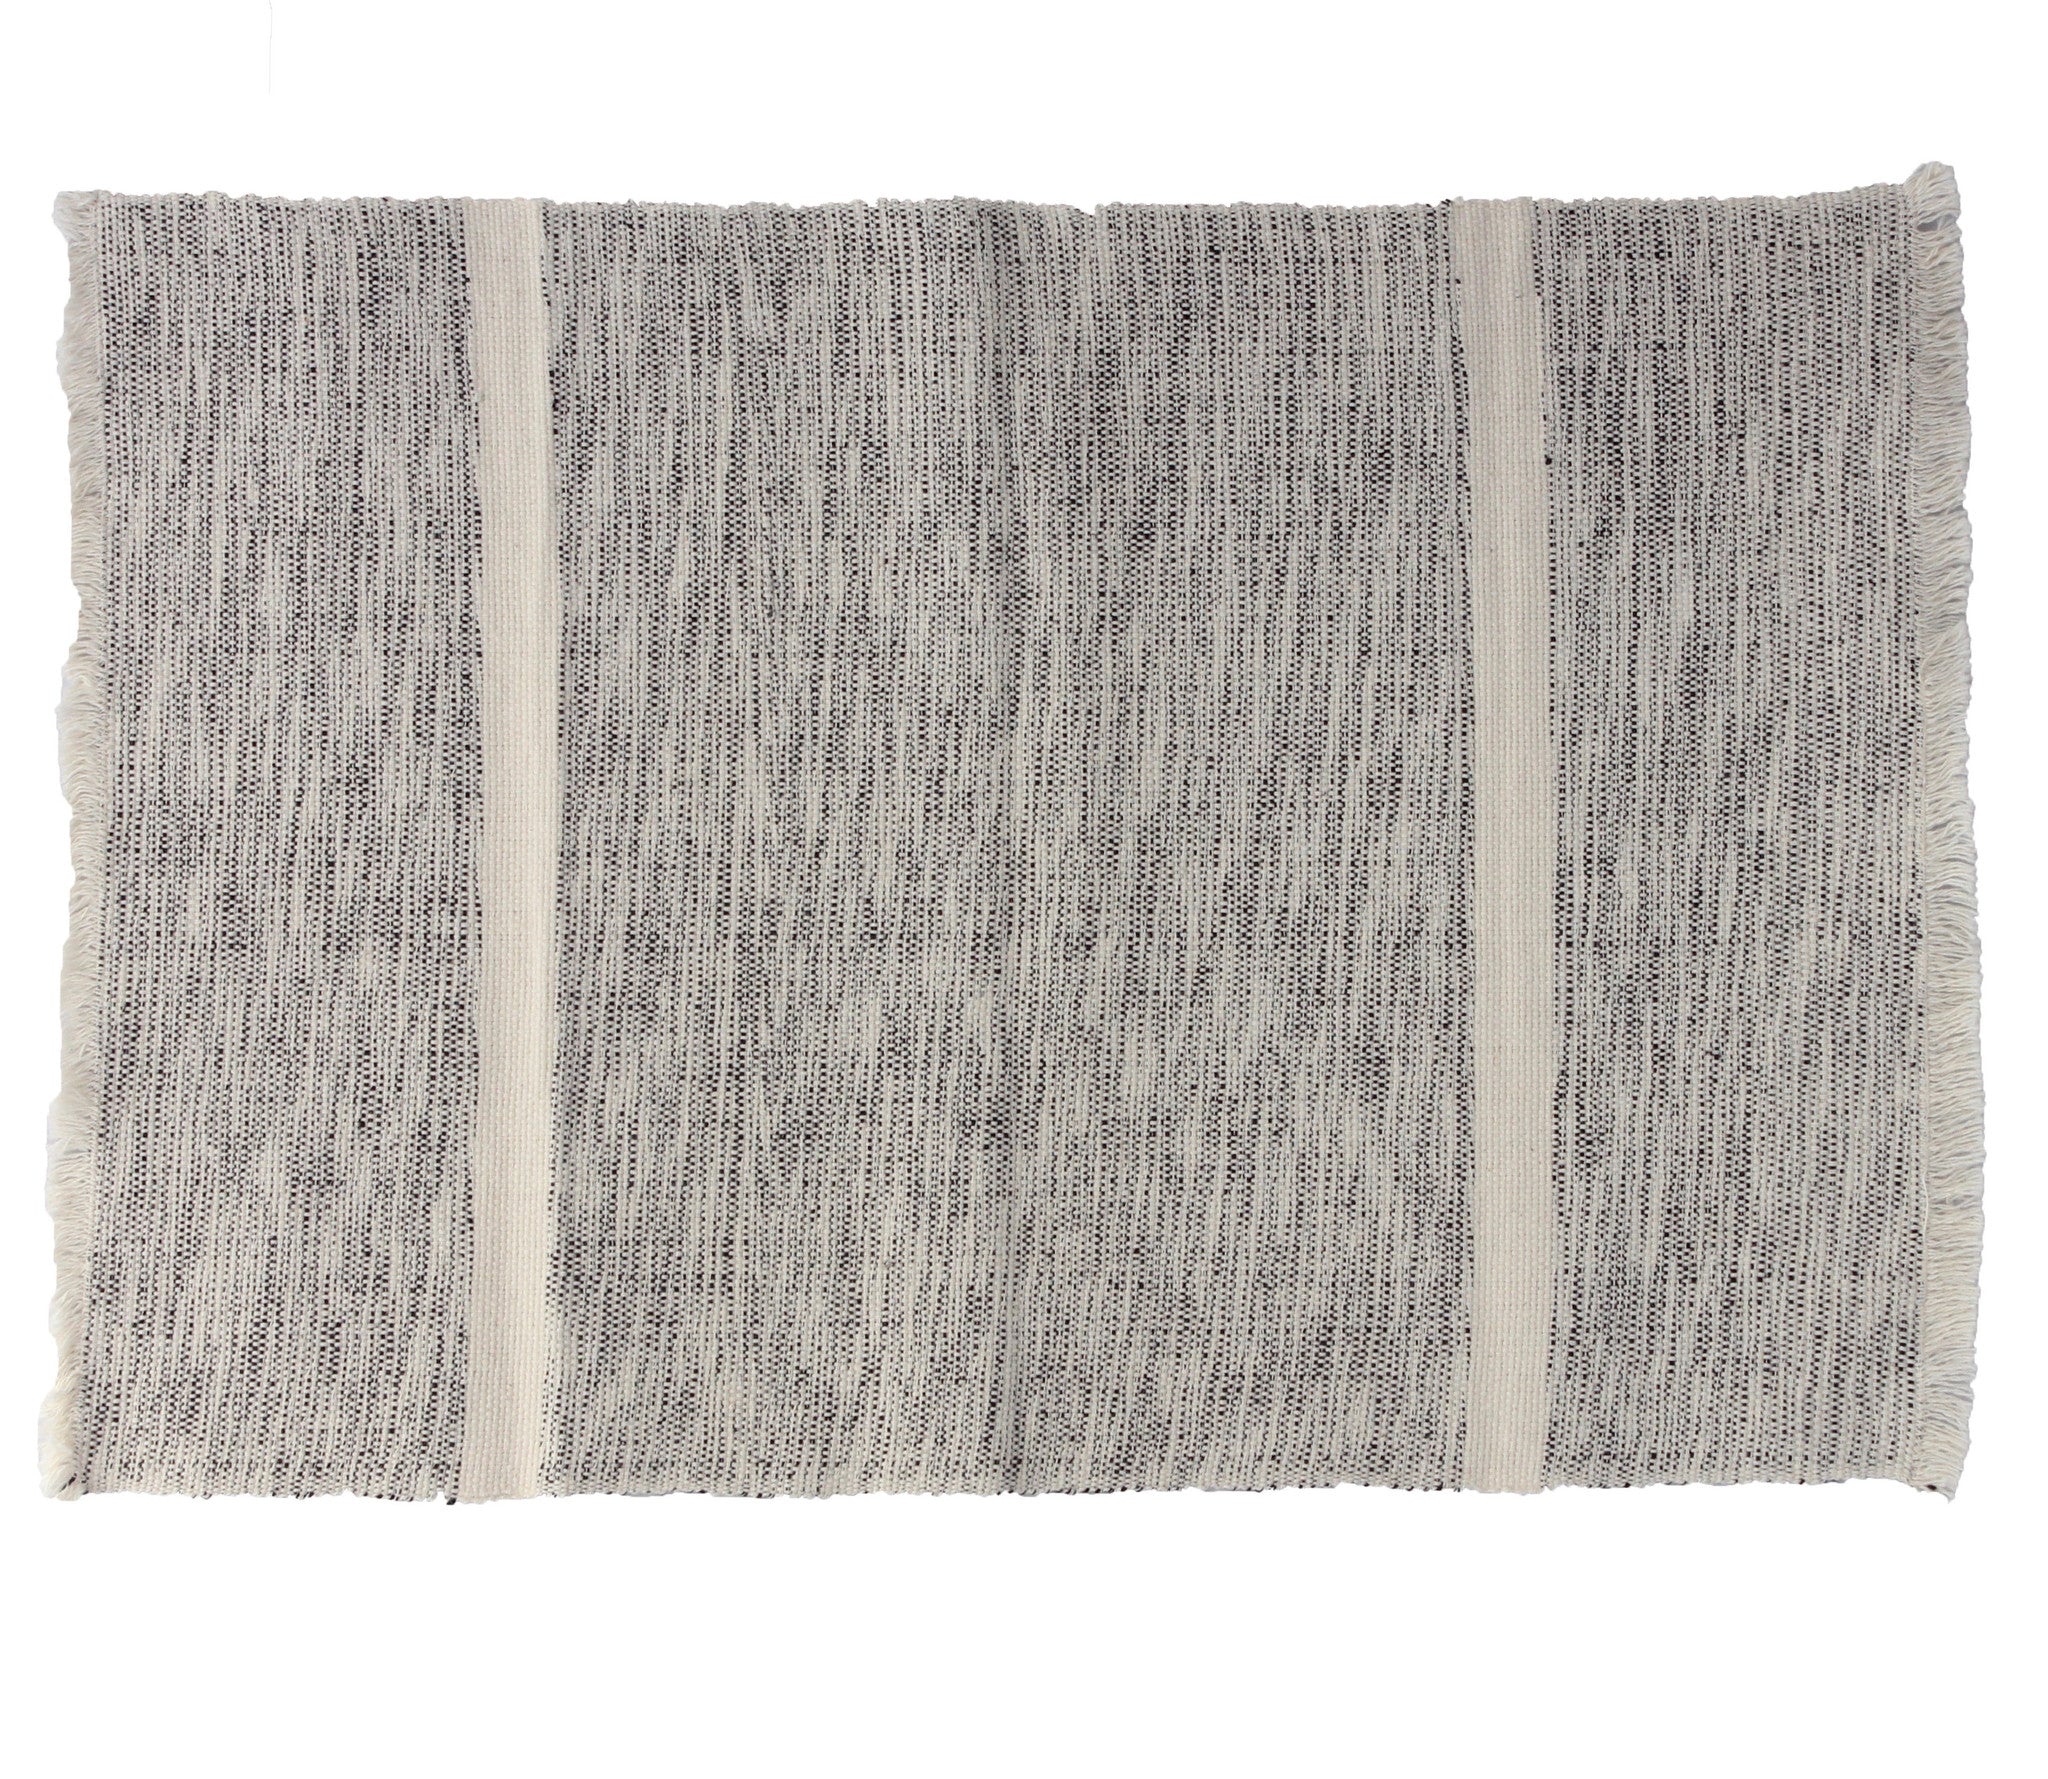 Handwoven 100% ecologically dyed cotton placemats in mixed grey and natural